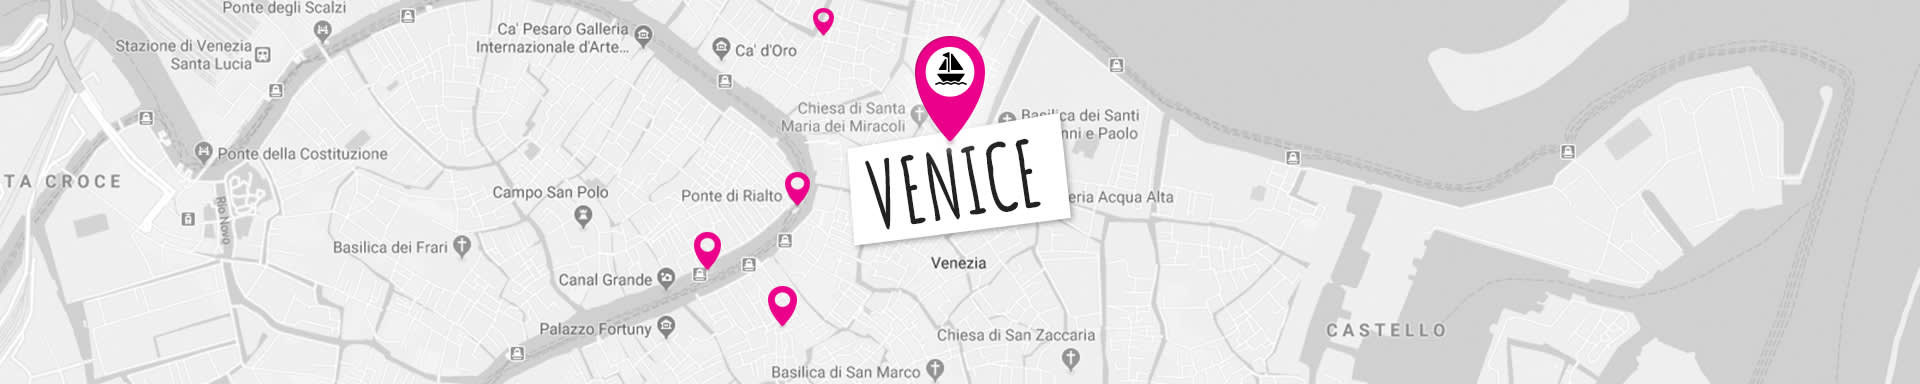 A guide to the Grand Canal in Venice